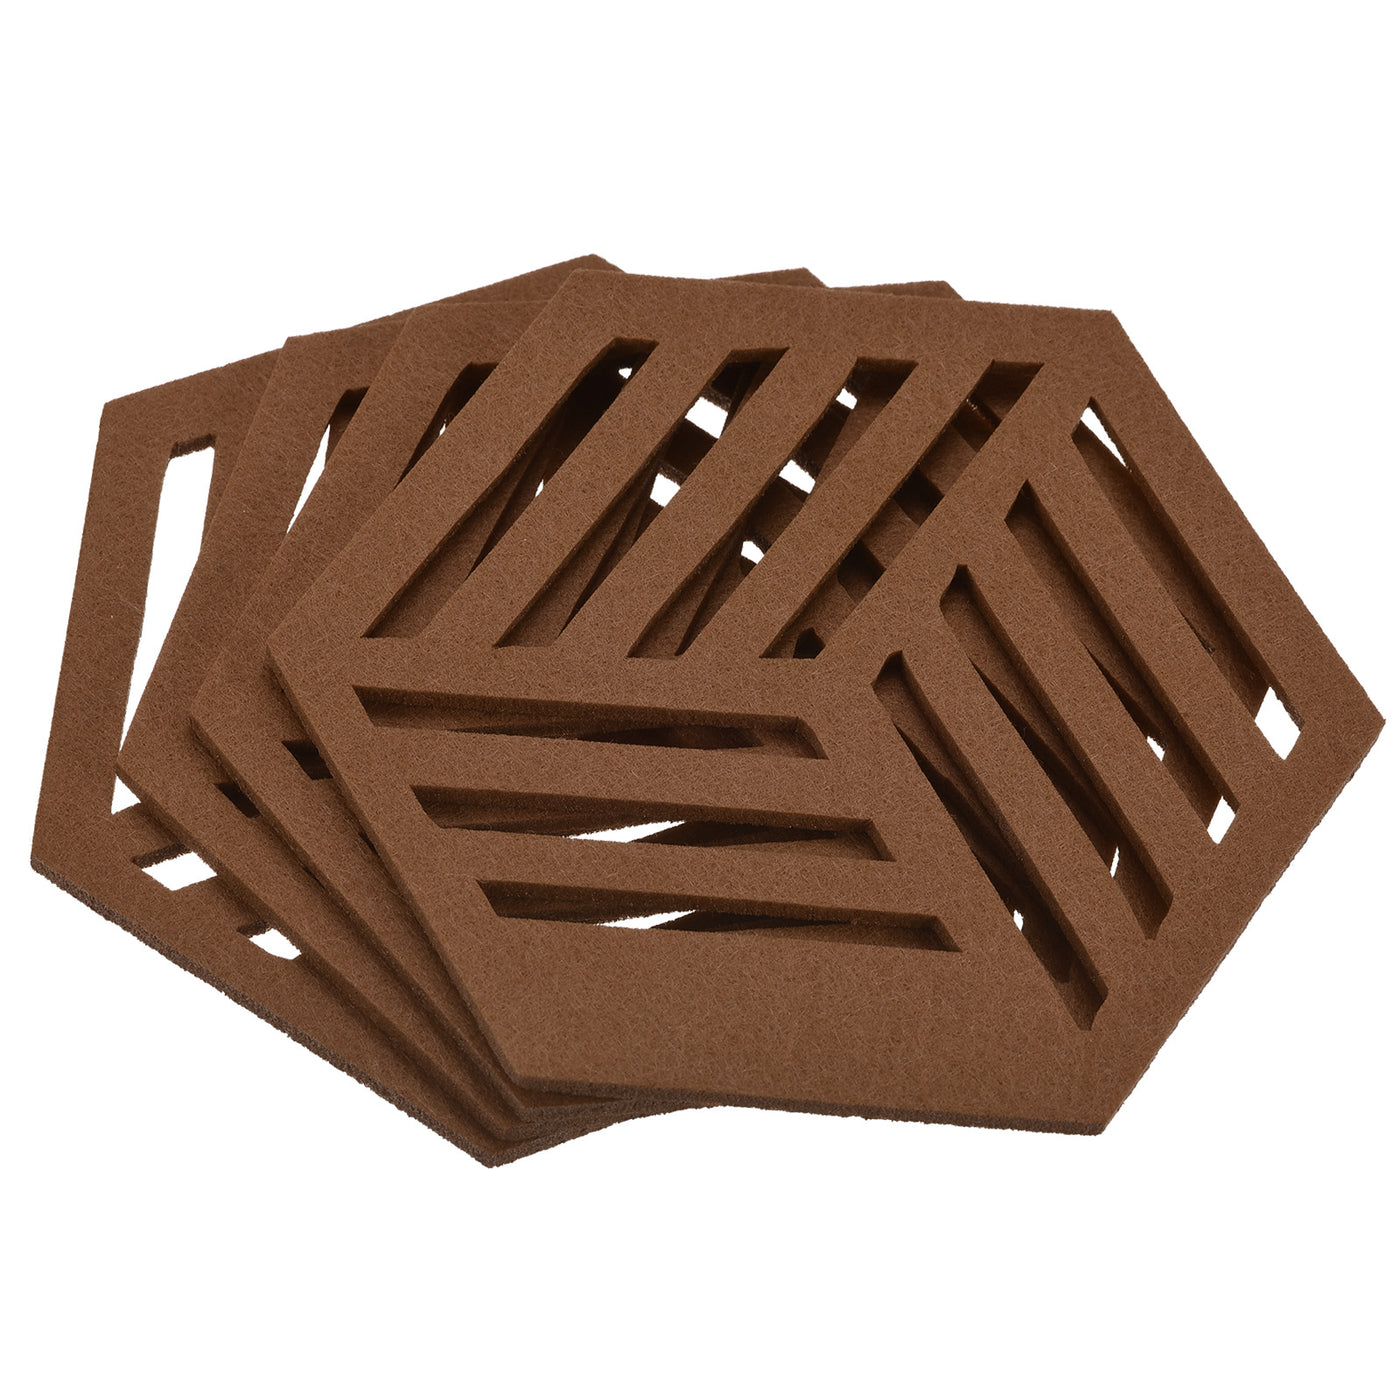 uxcell Uxcell Felt Coasters, 4pcs Hexagon Mat Pad Coaster for Drink Cup Pot Bowl Vase, Brown